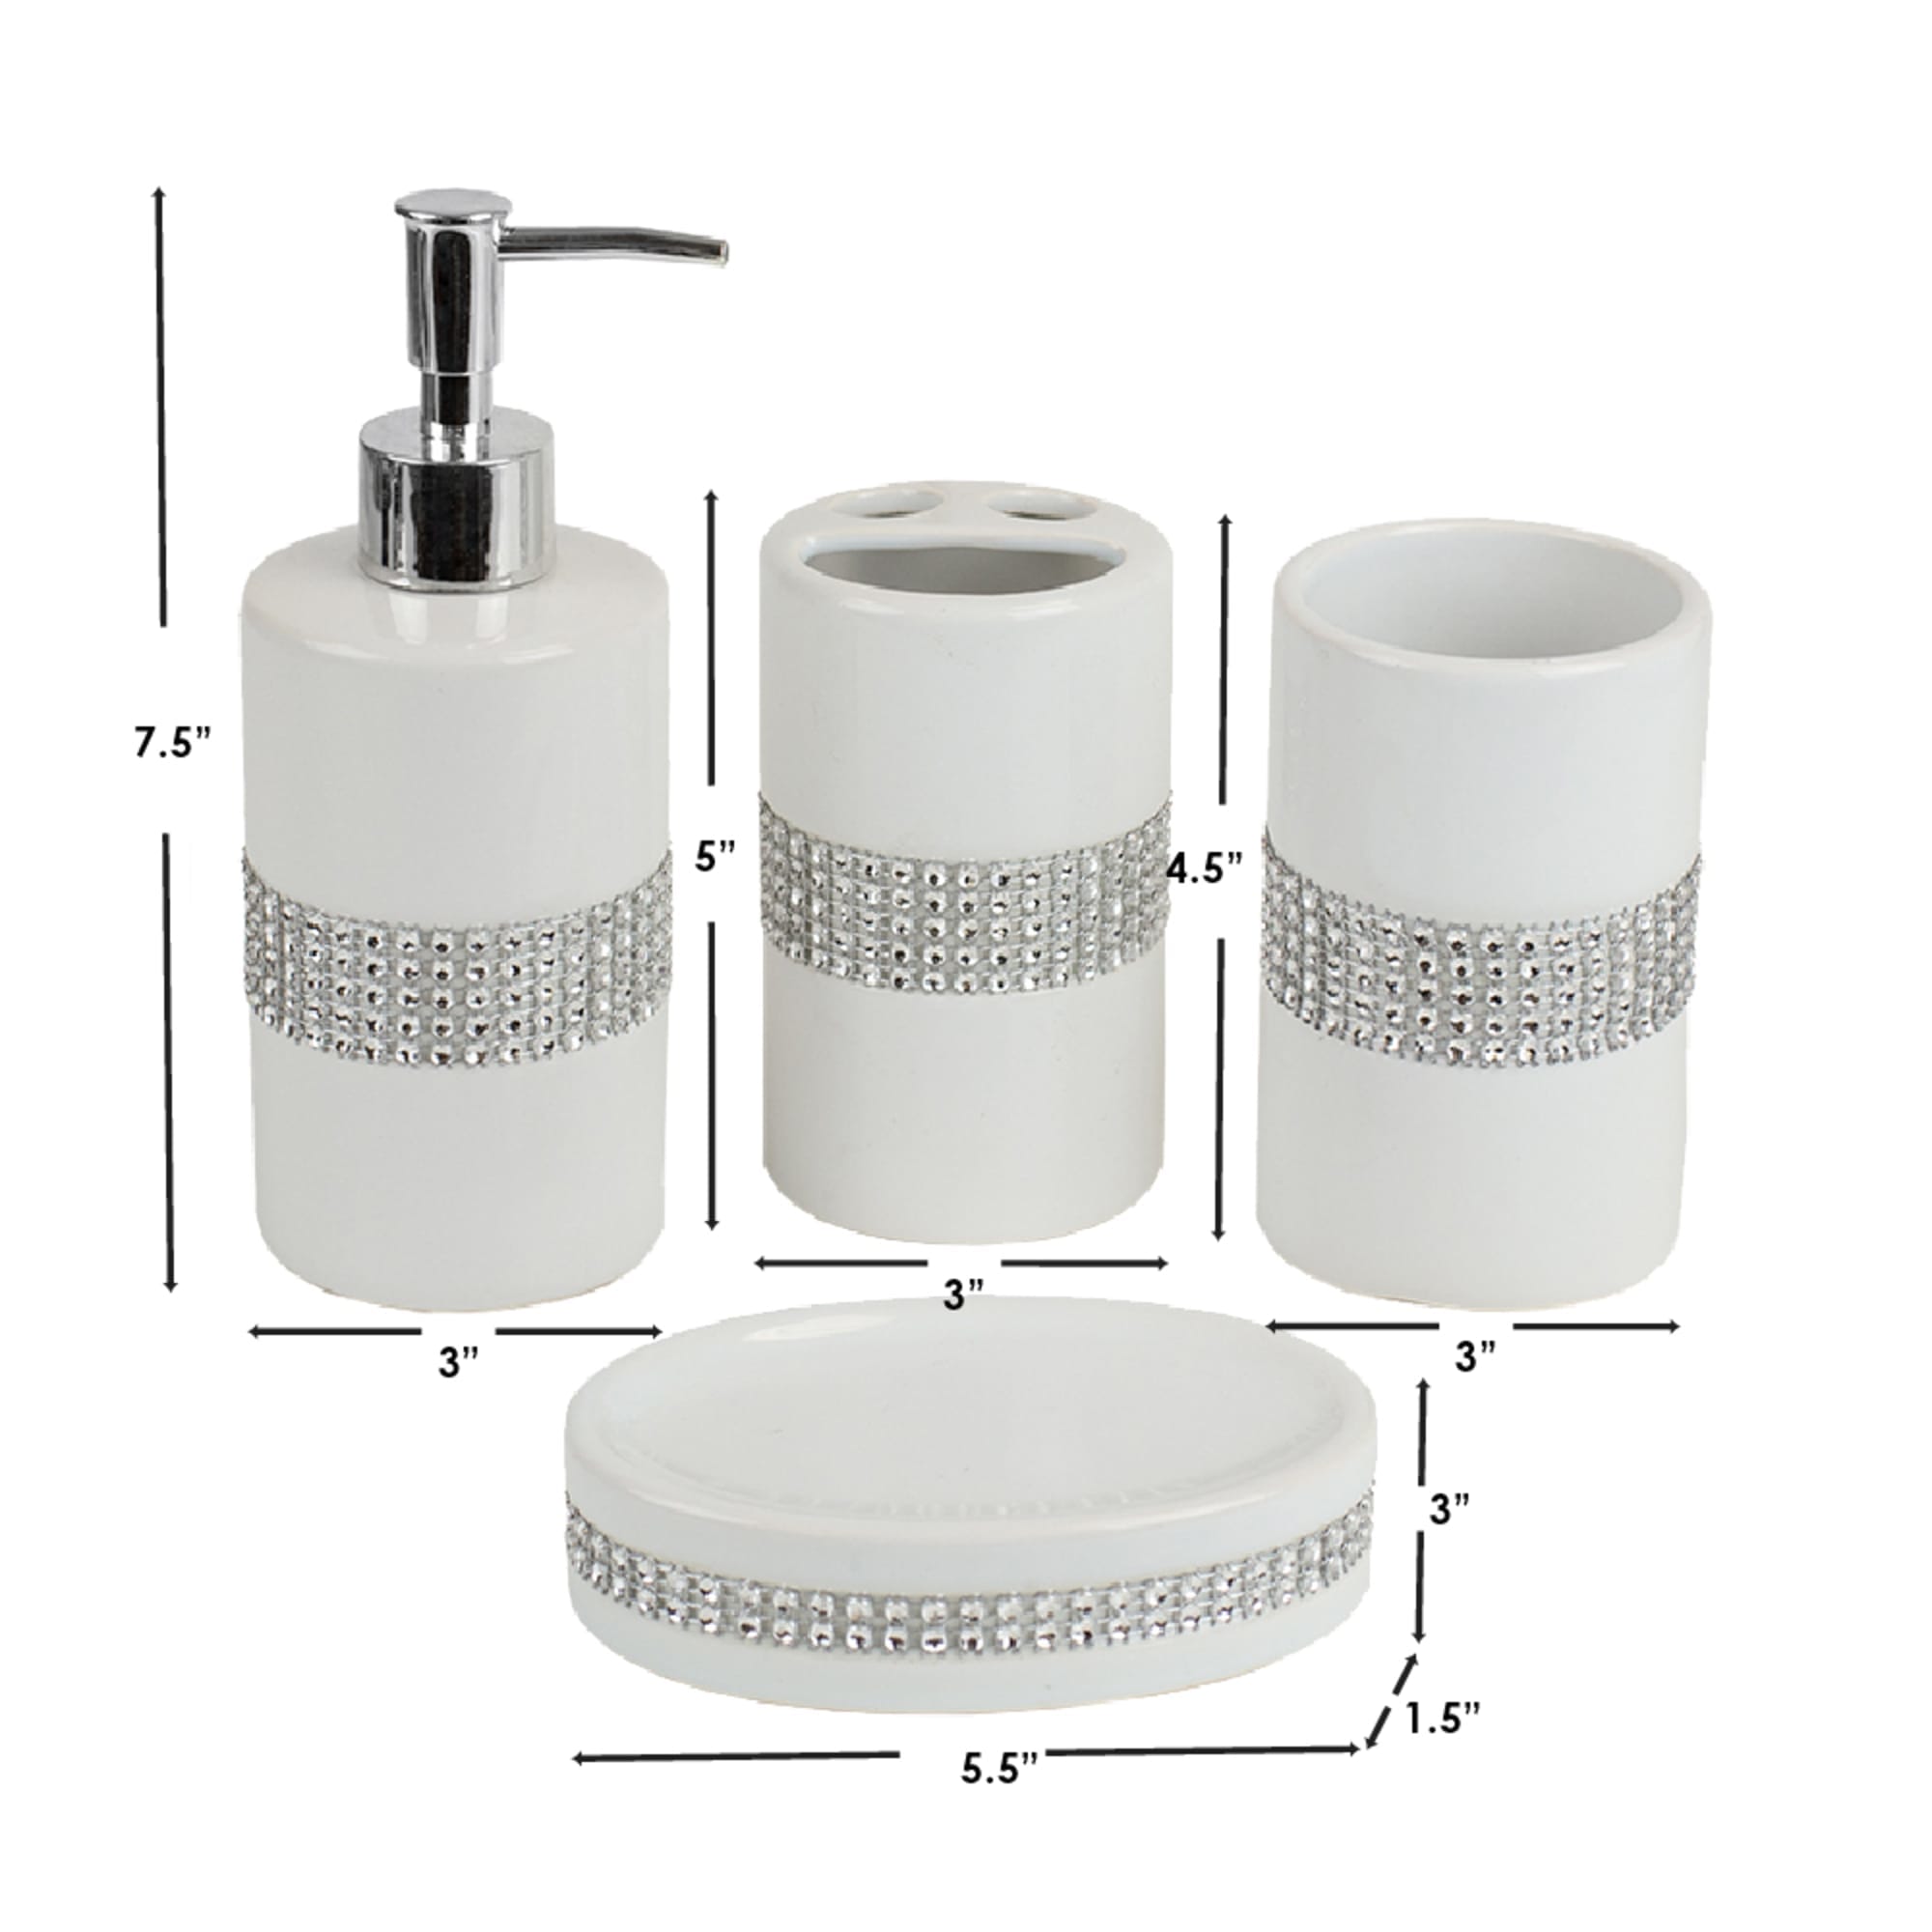 Home Basics 4 Piece Ceramic Luxury Bath Accessory Set with Stunning Sequin Accents, White $10.00 EACH, CASE PACK OF 12